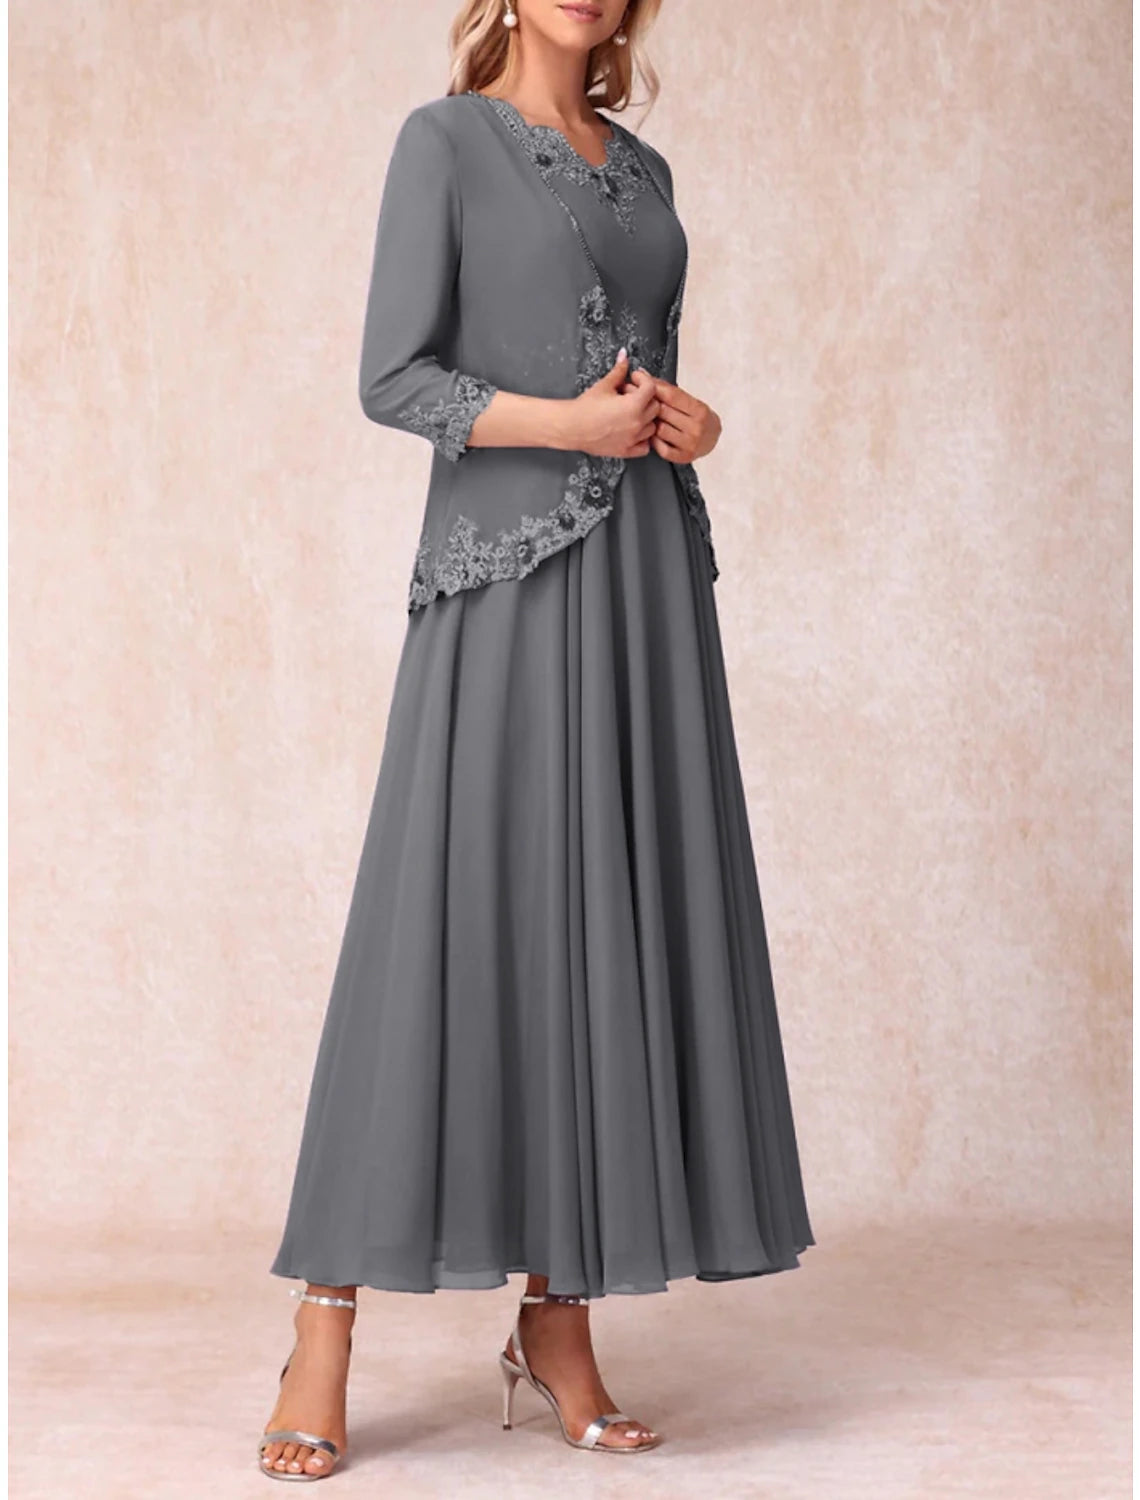 A-Line Mother of the Bride Dress Wedding Guest Elegant V Neck Ankle Length Chiffon 3/4 Length Sleeve with Lace Ruching Solid Color